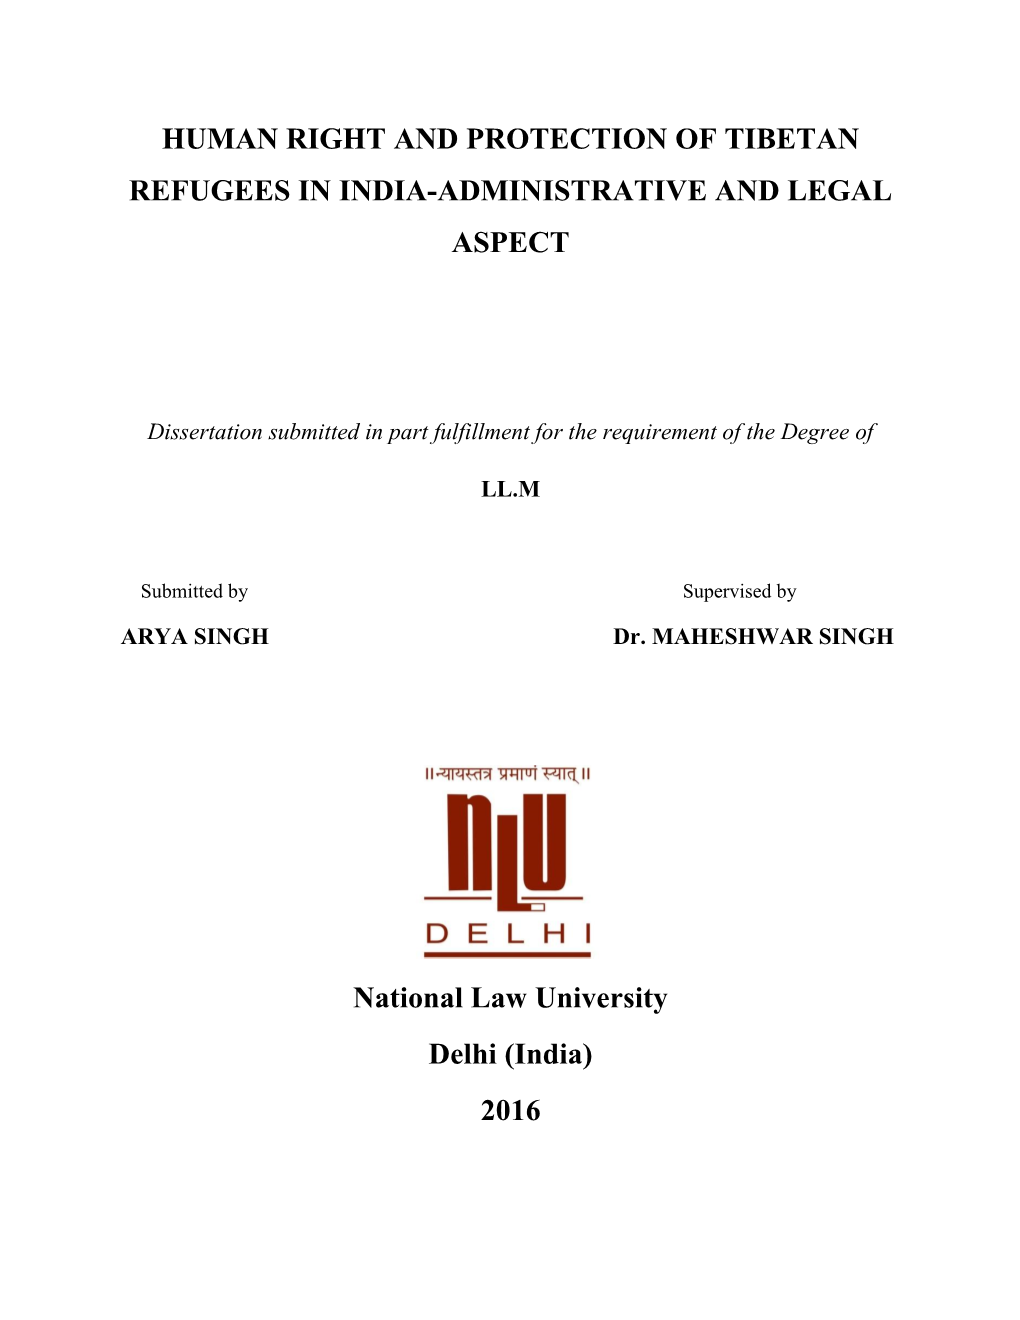 Human Right and Protection of Tibetan Refugees in India-Administrative and Legal Aspect